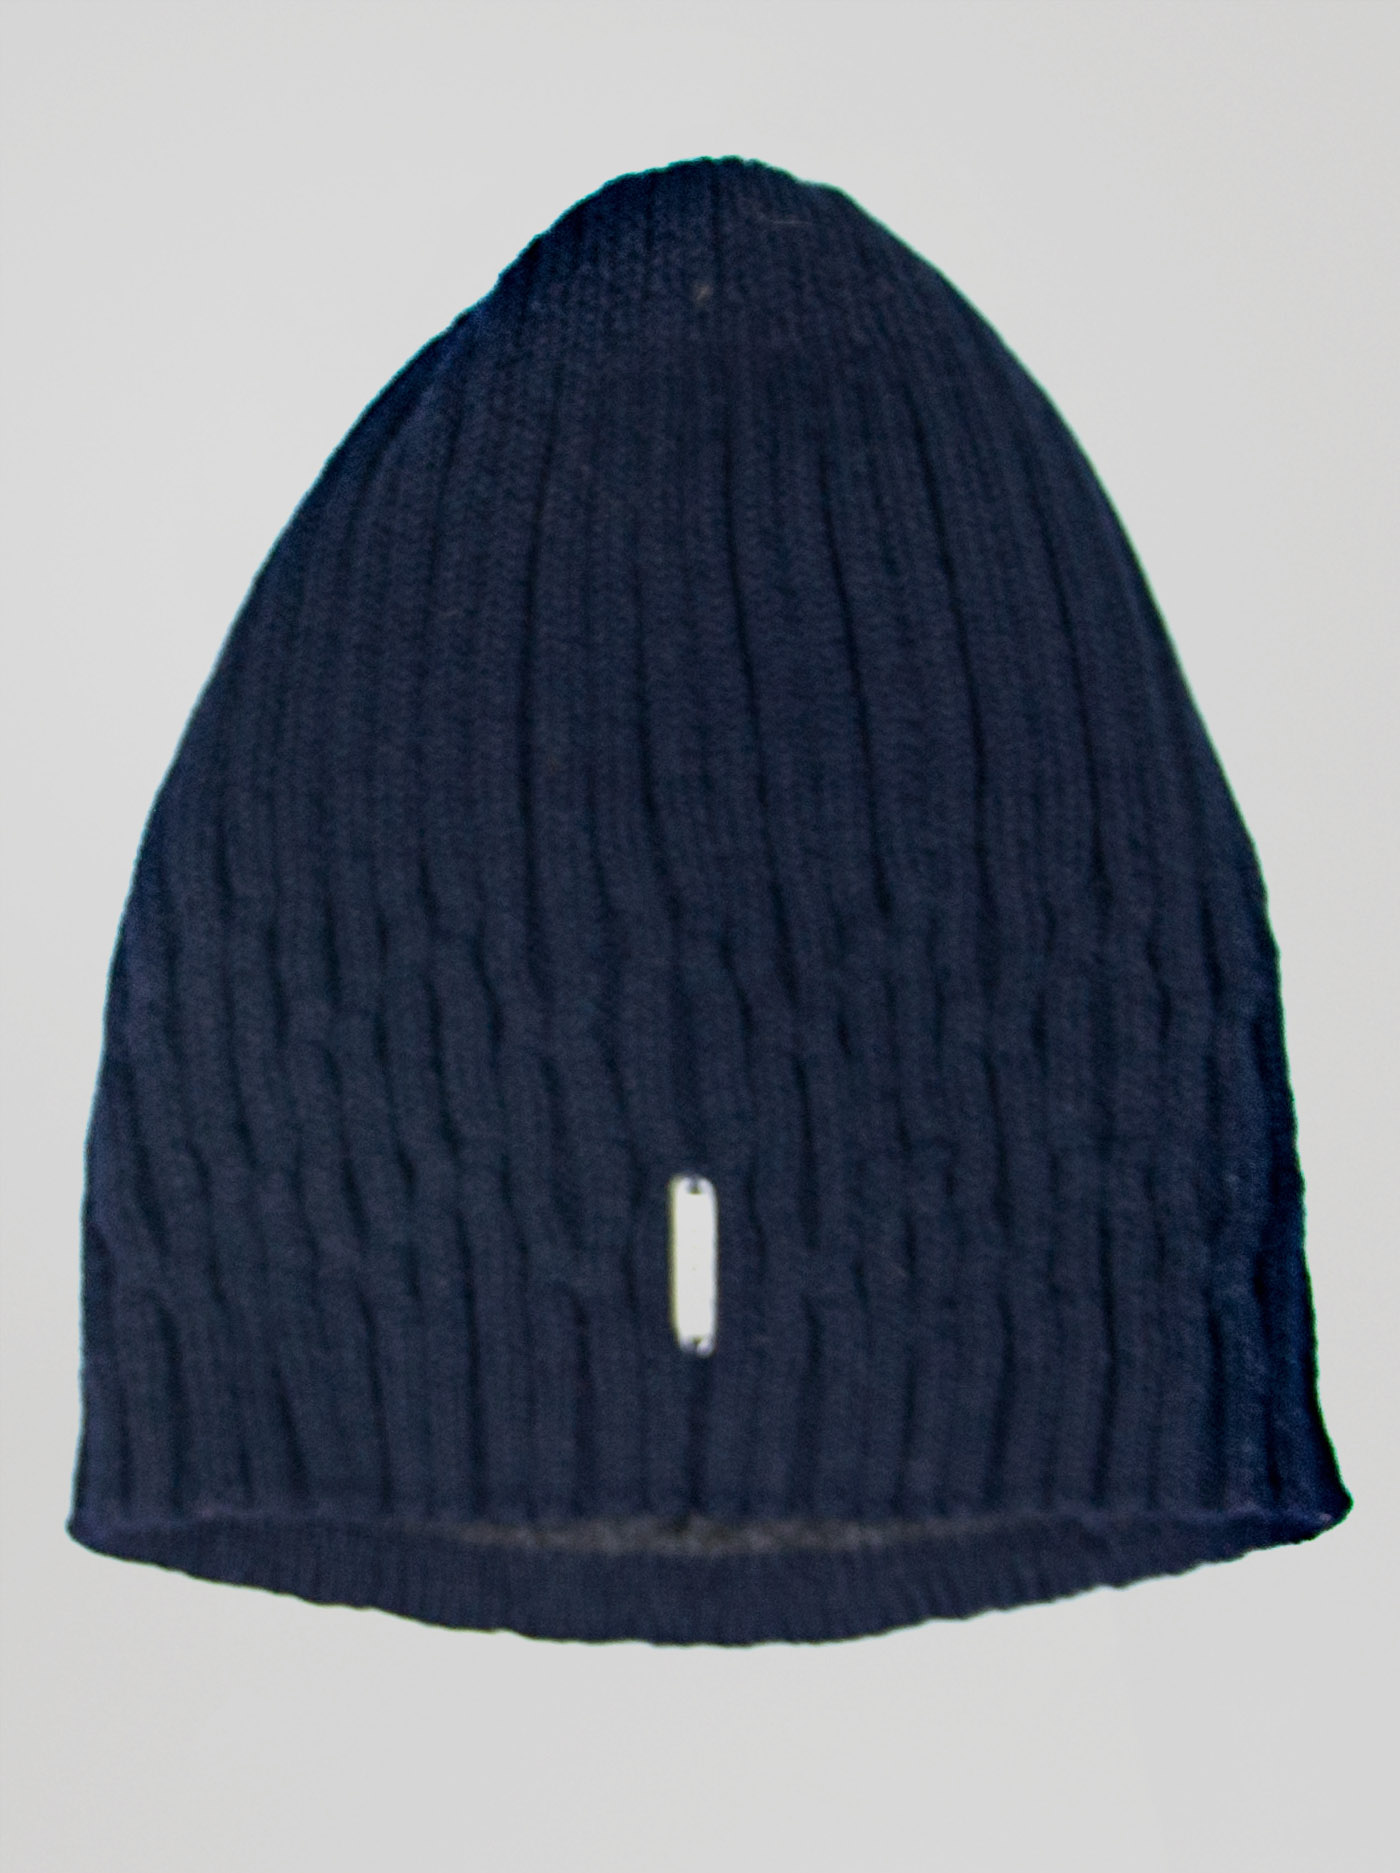 Cap with wool - Loman image 2